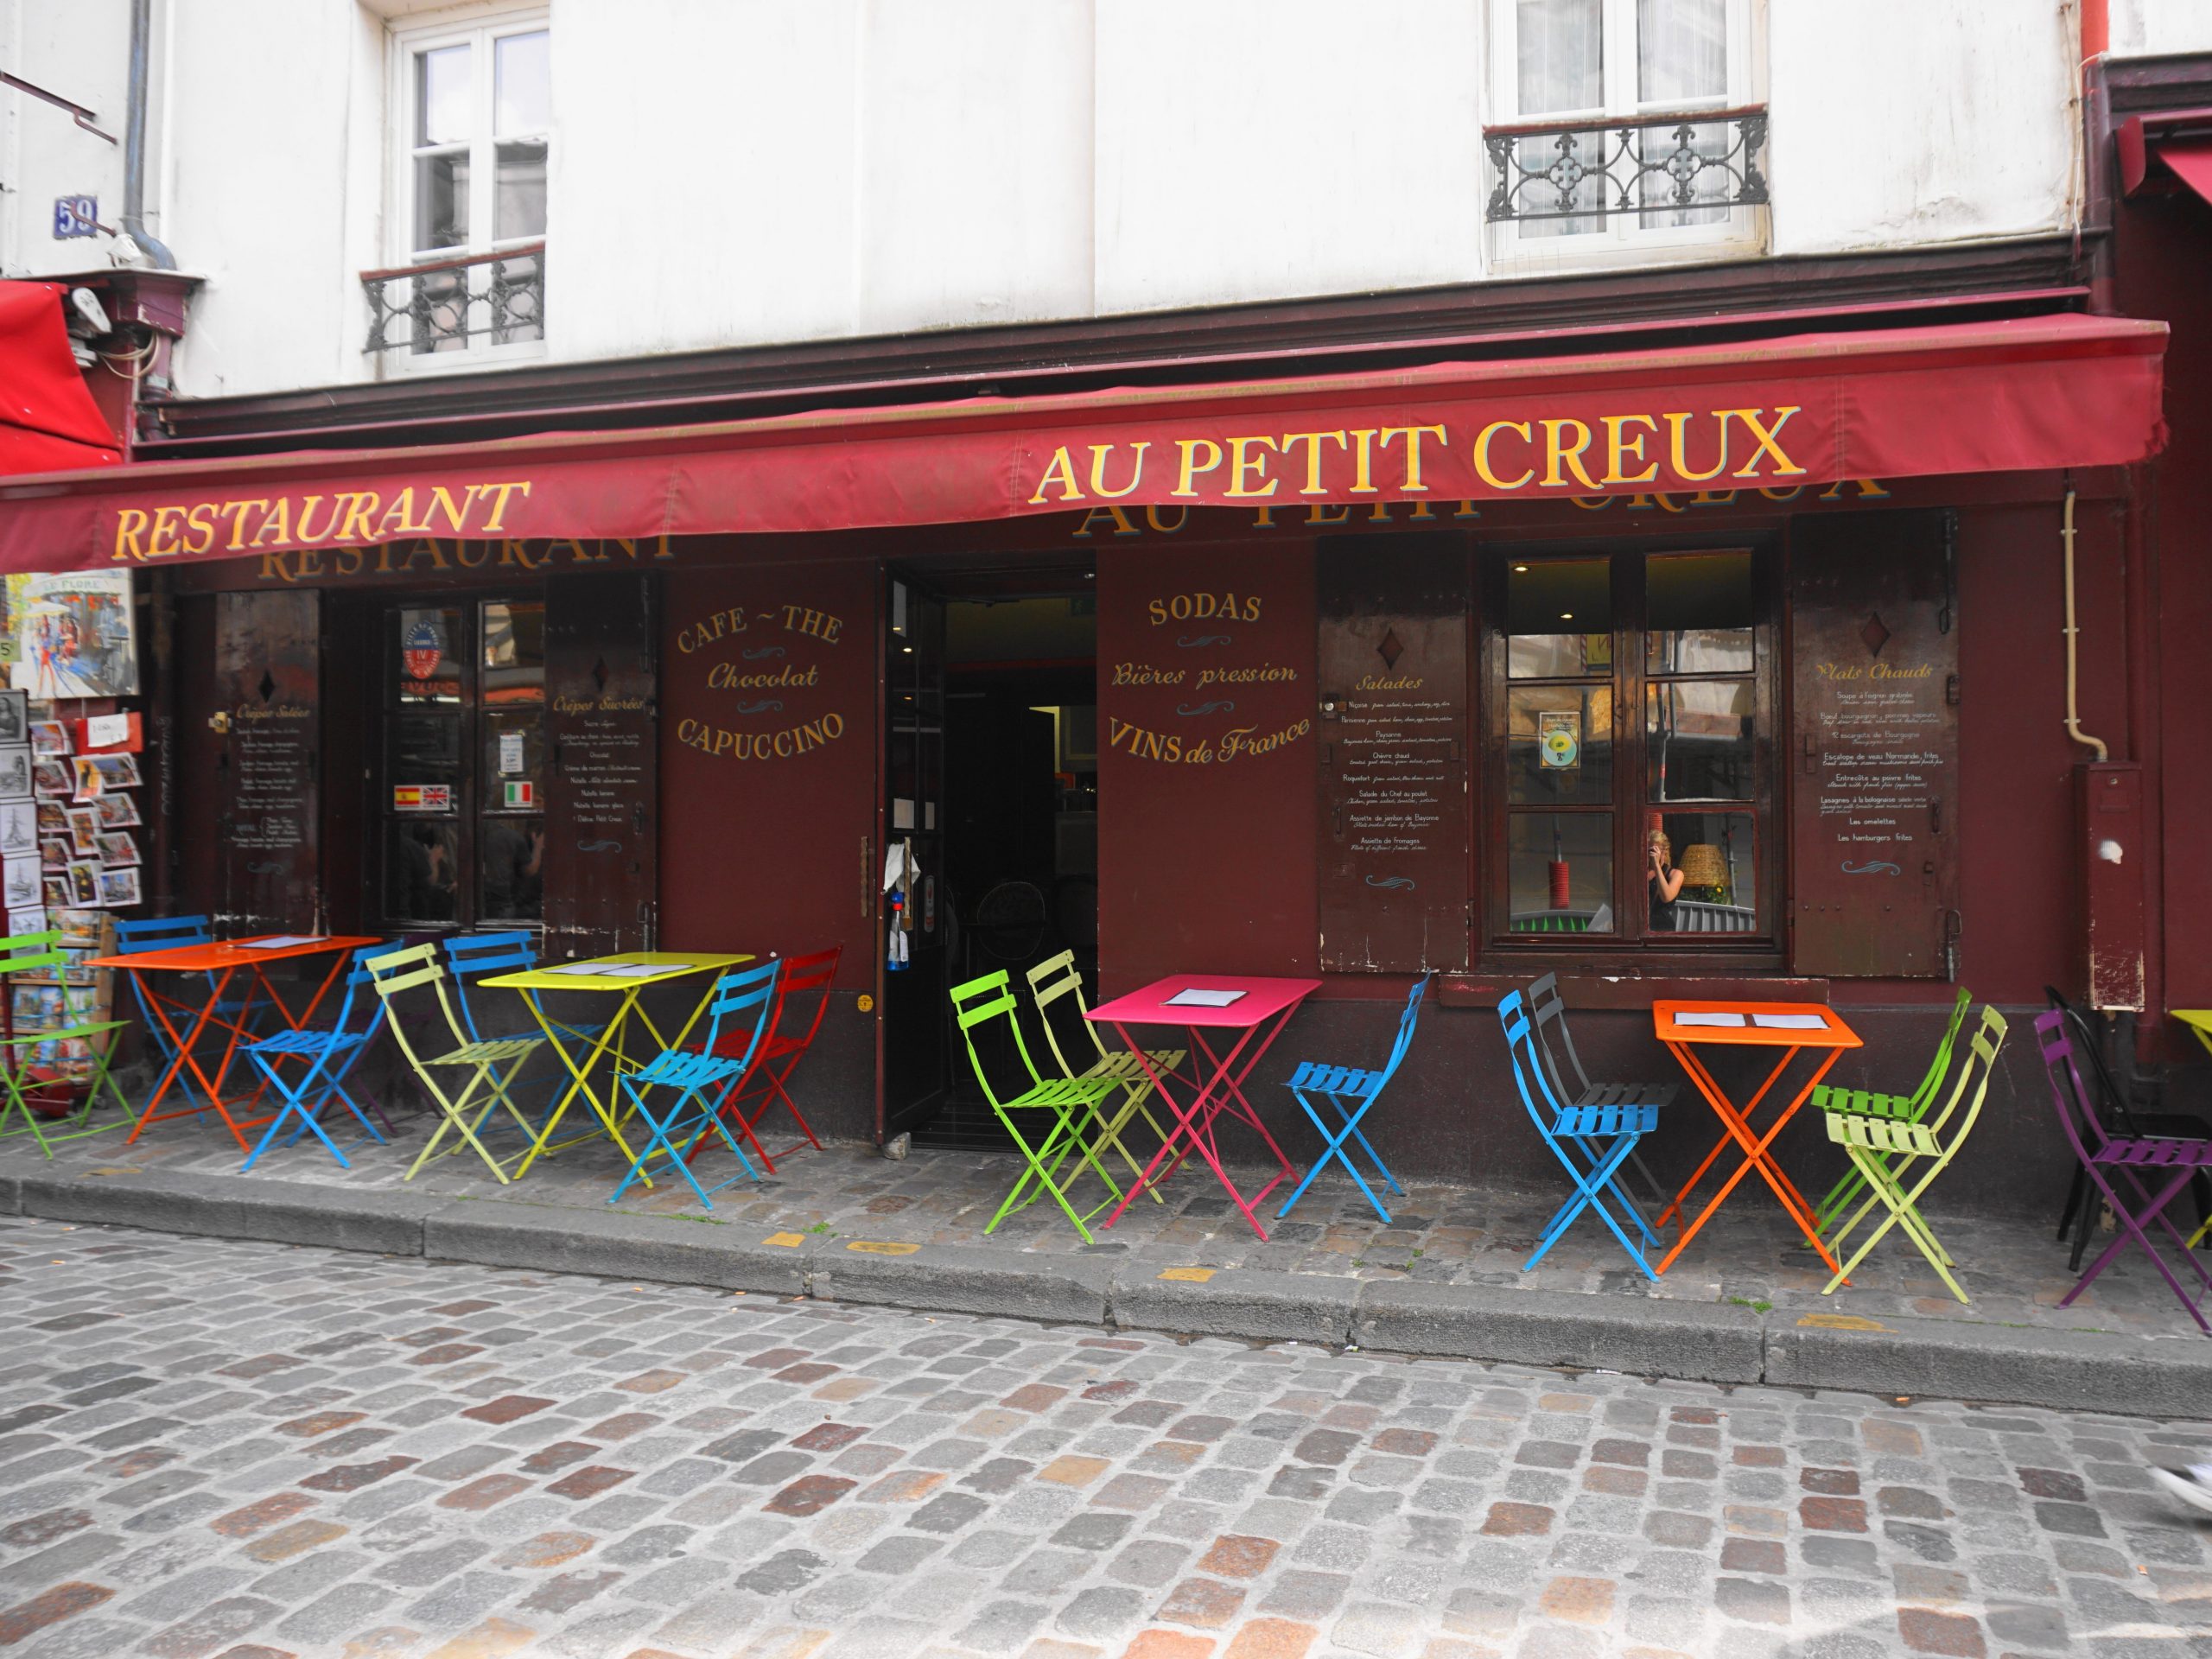 Parisian cafe with colorful dining